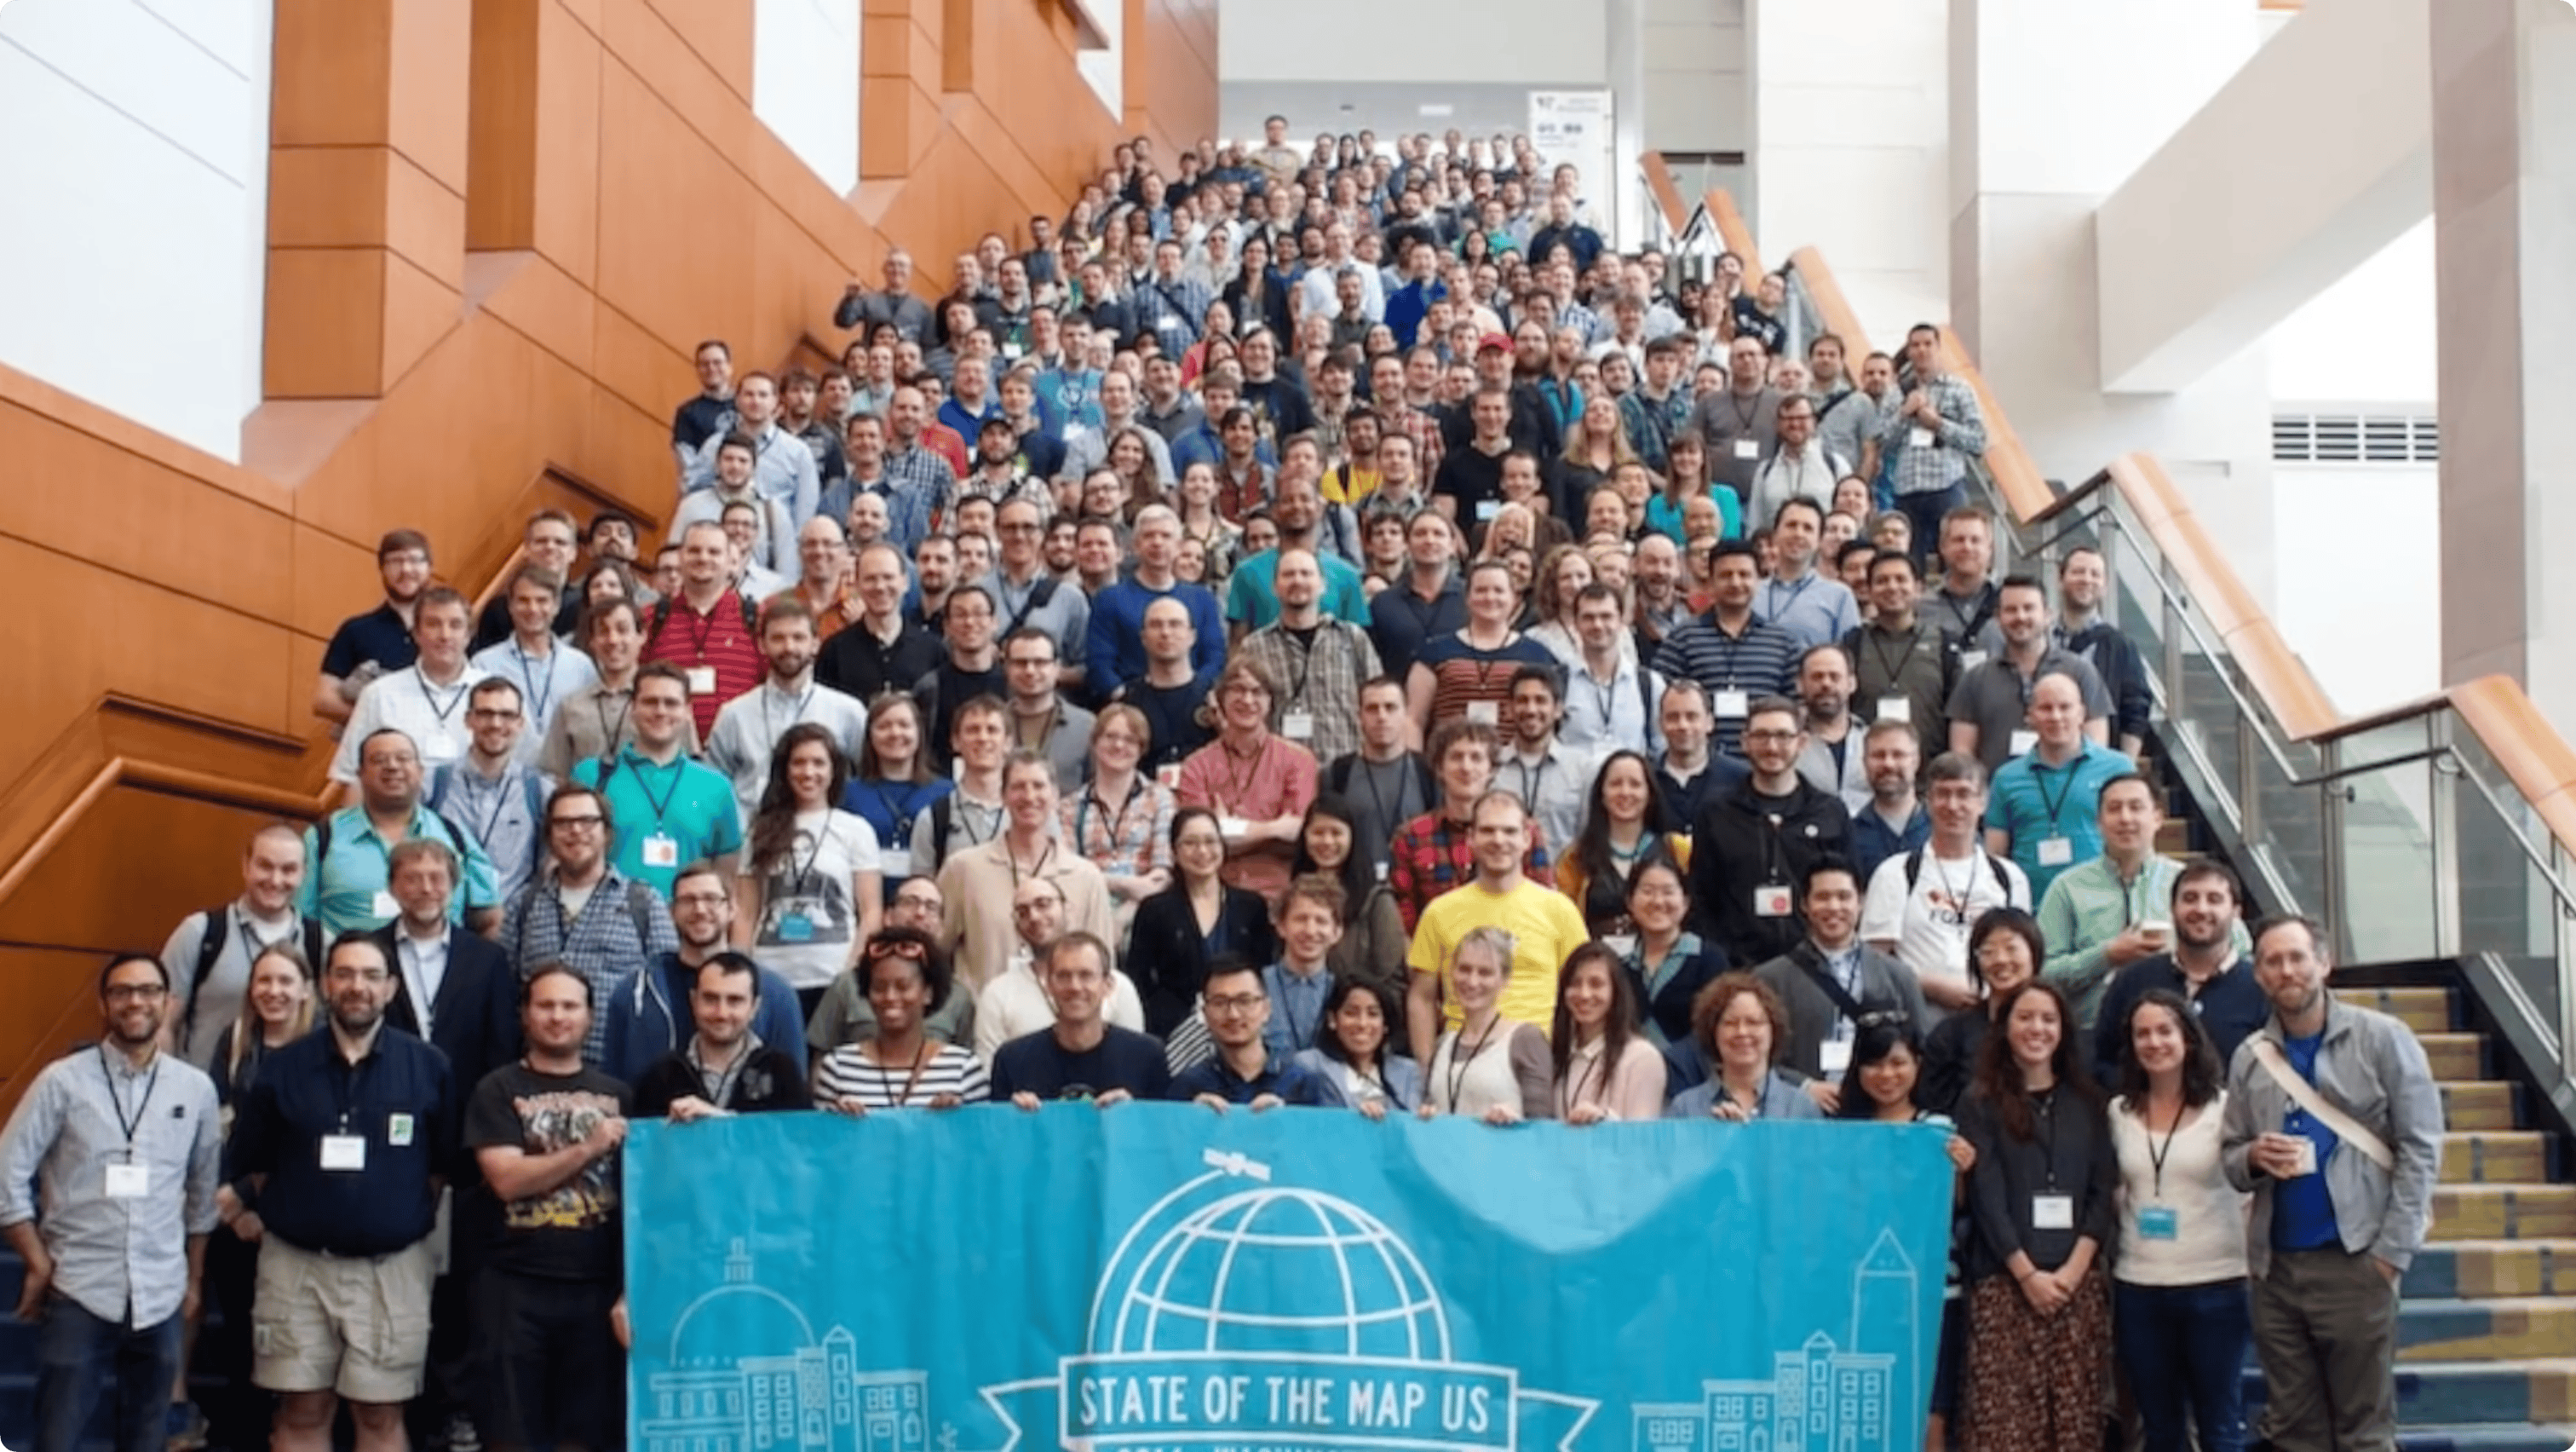 A group photo with participants of the SotM US conference